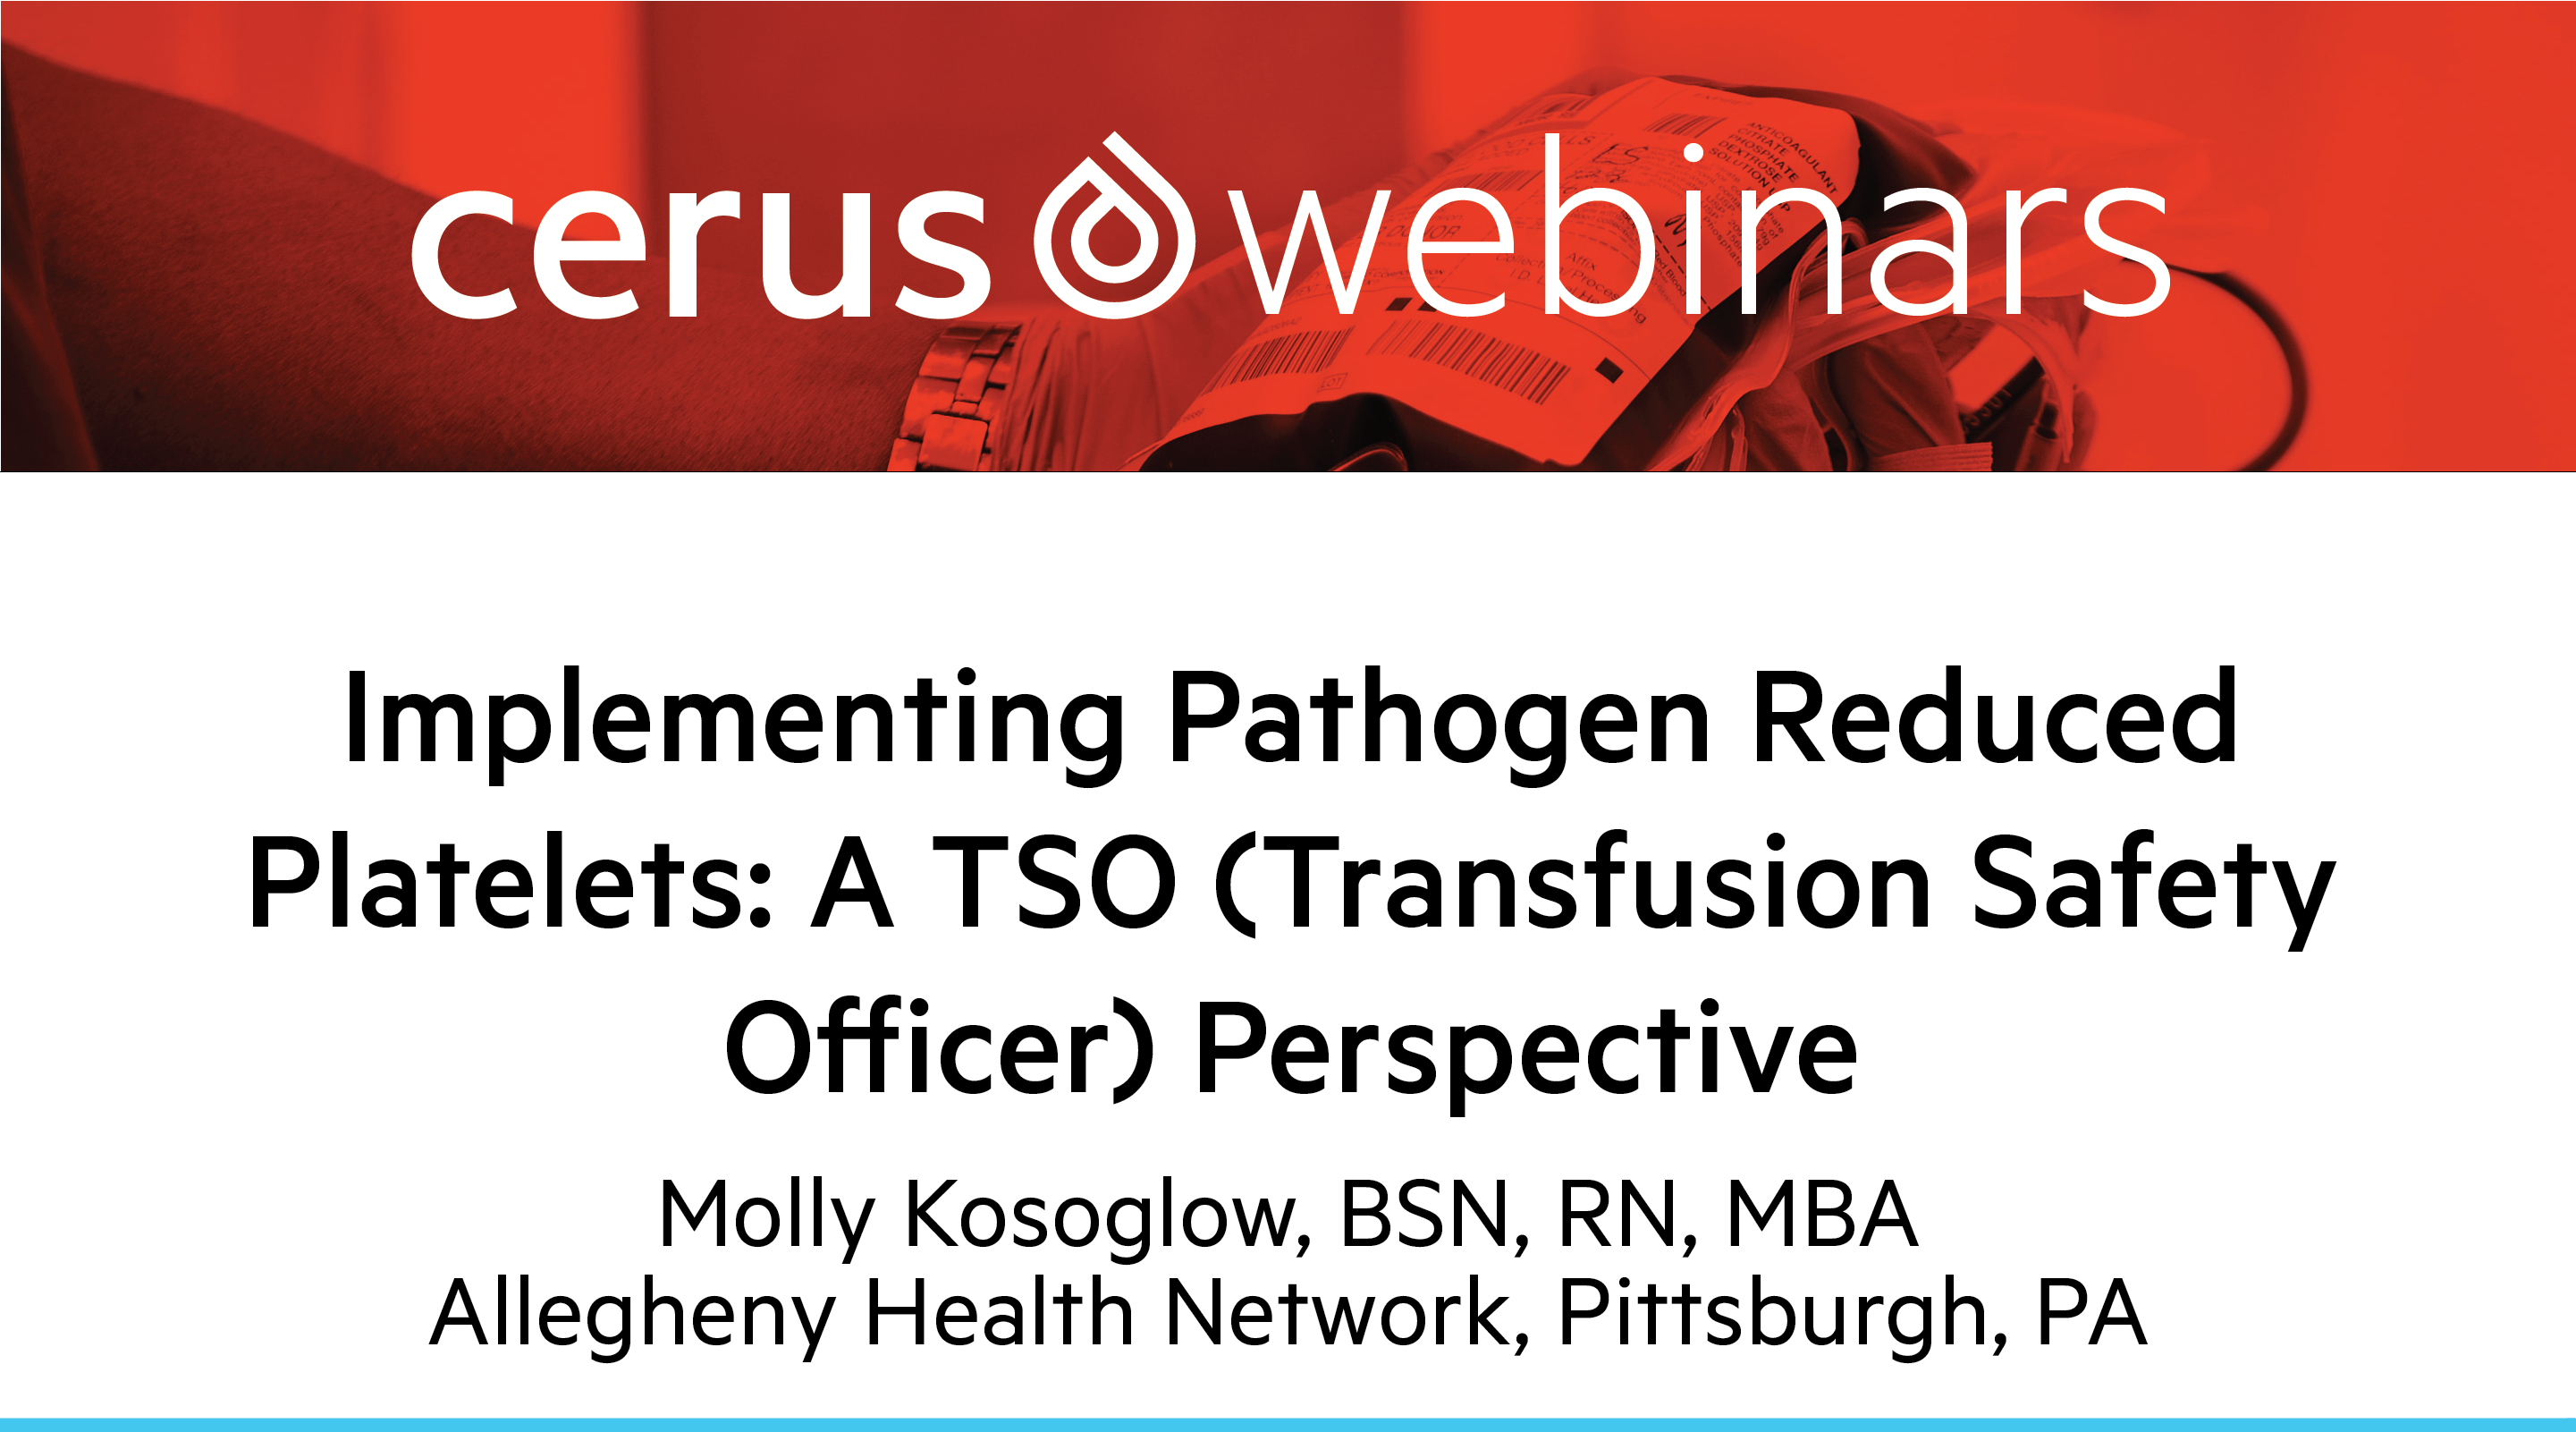 Implementing Pathogen Reduced Platelets: a Transfusion Safety Officer Perspective